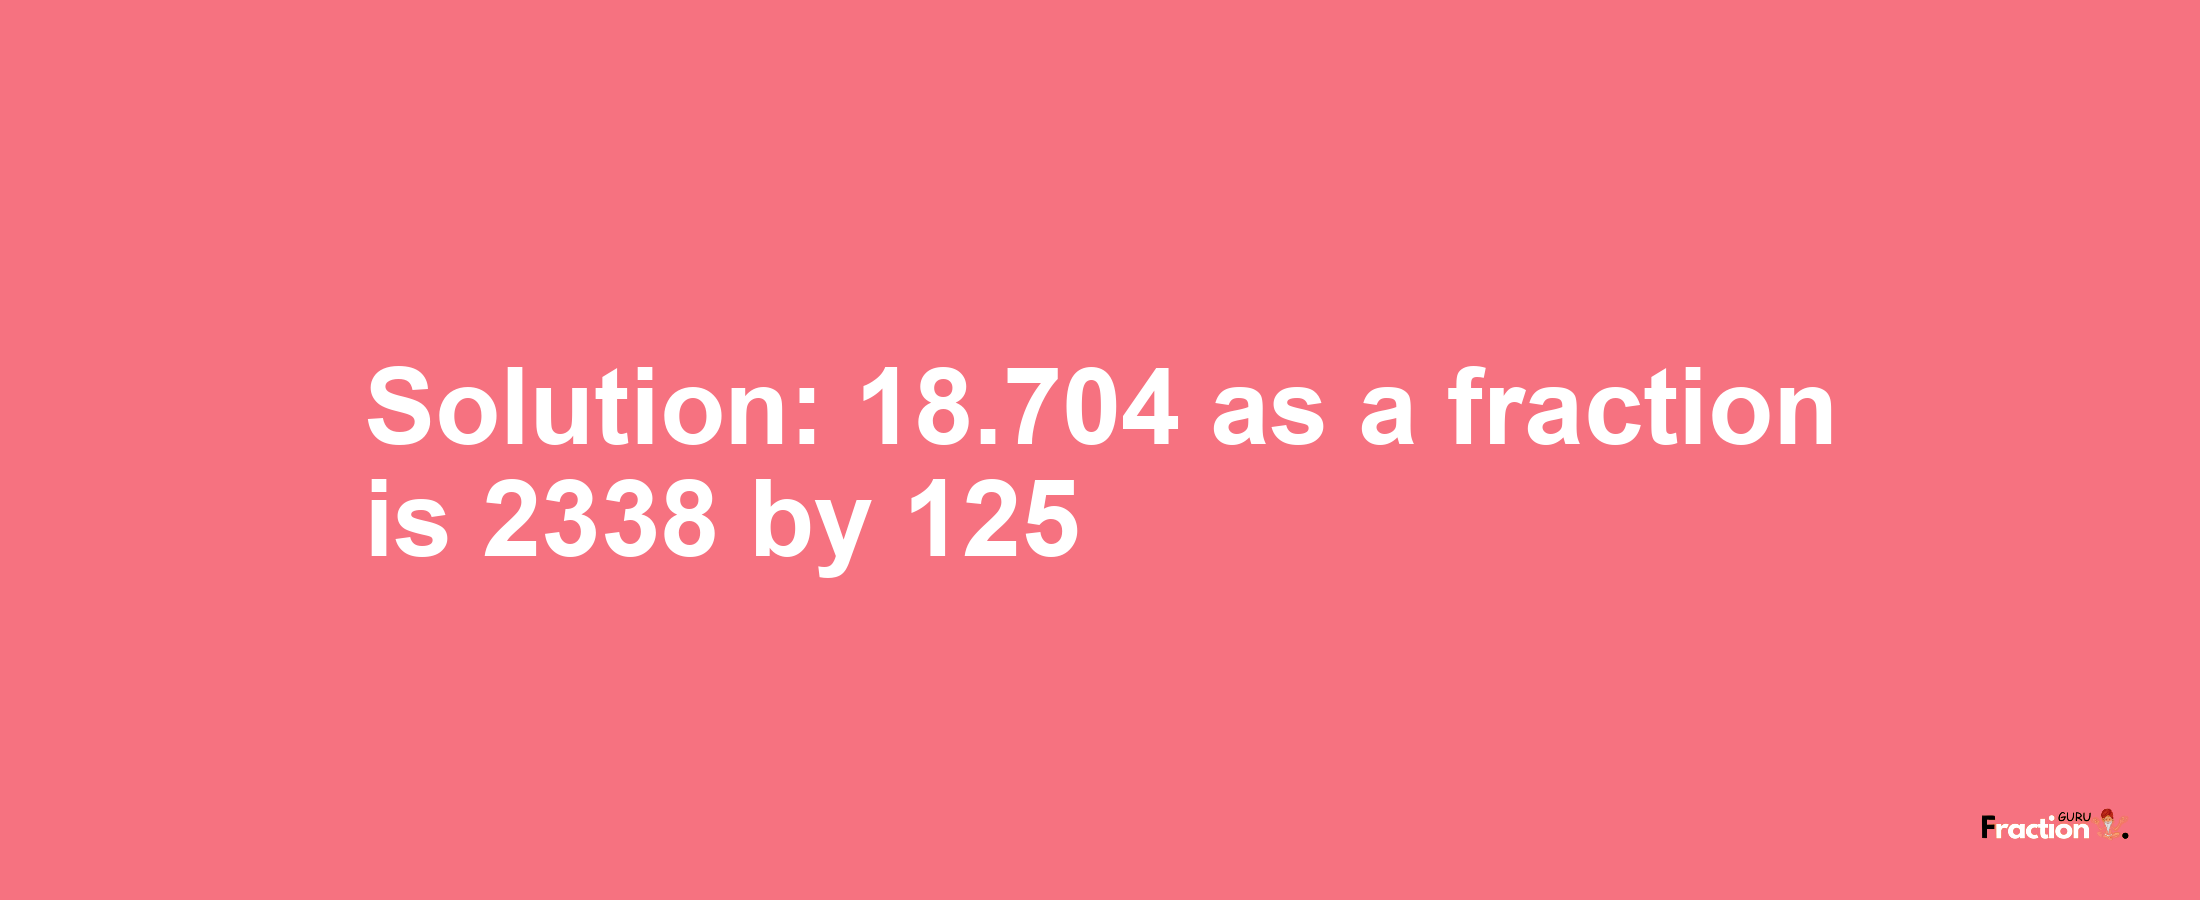 Solution:18.704 as a fraction is 2338/125